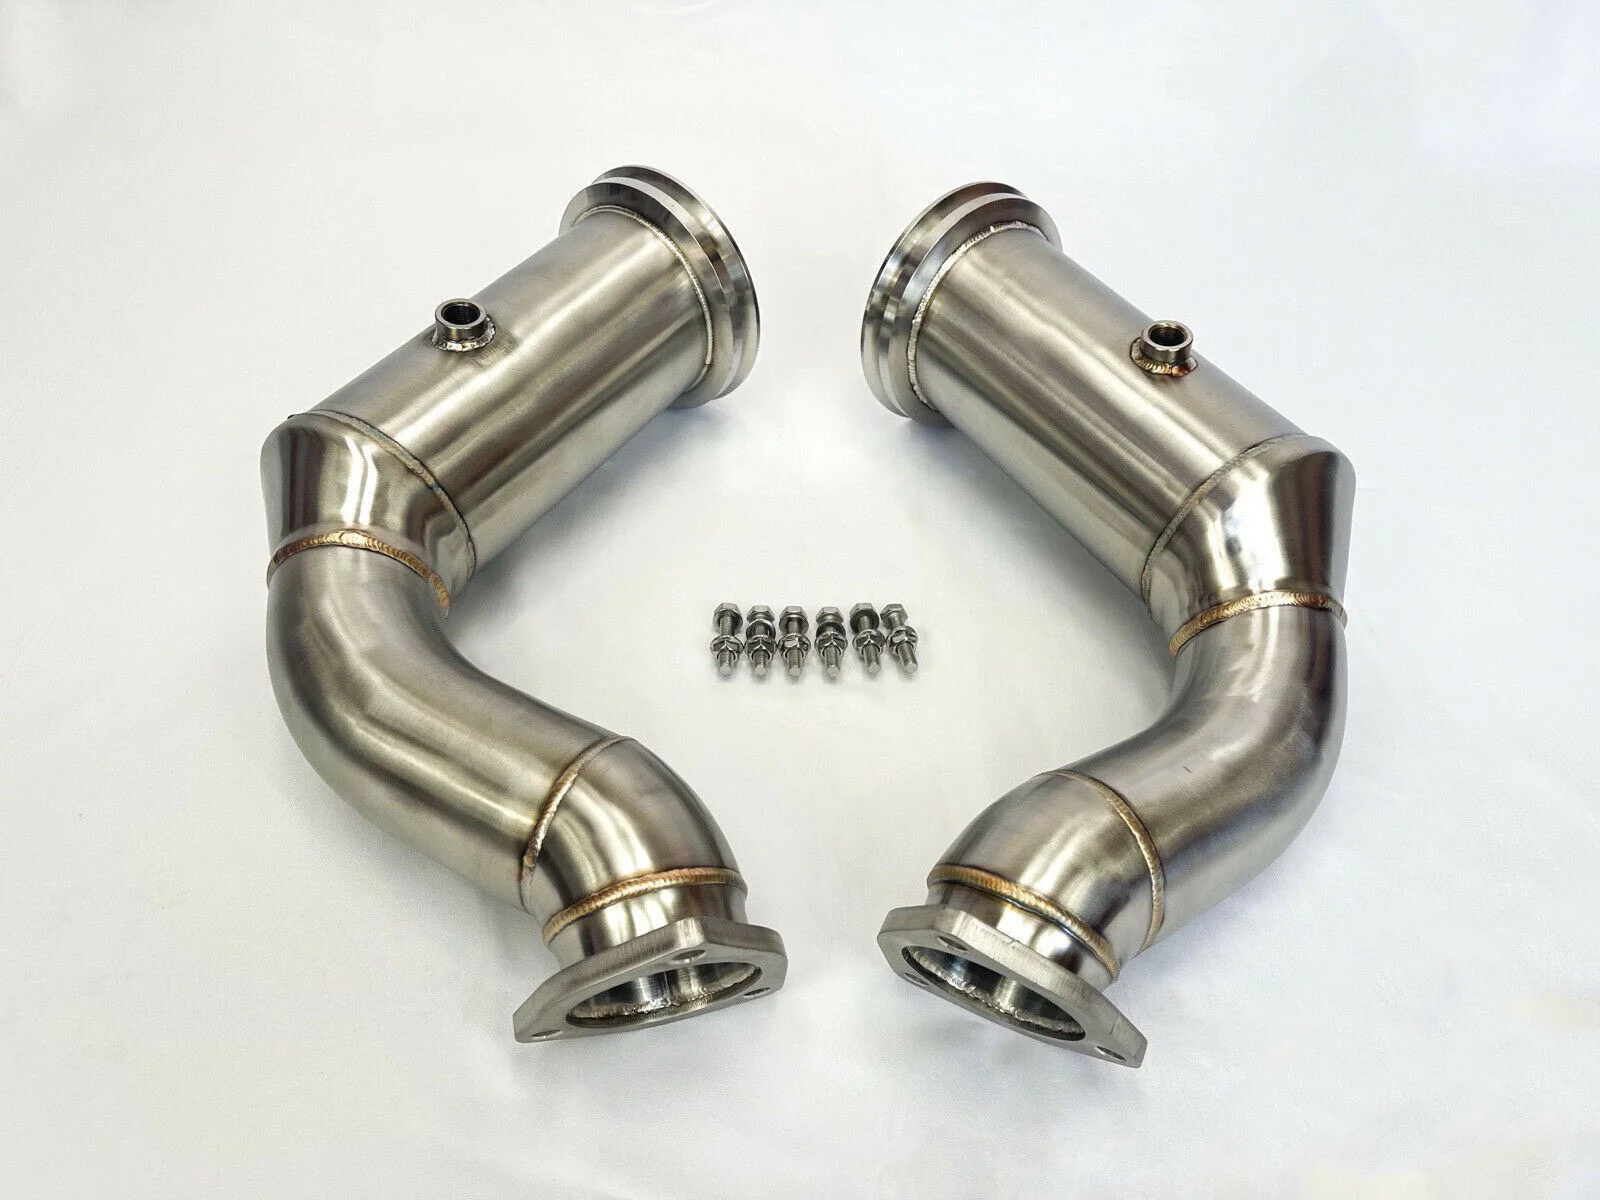 MODE Design Decatted Downpipes for Audi SQ7 SQ8 RSQ8 4M